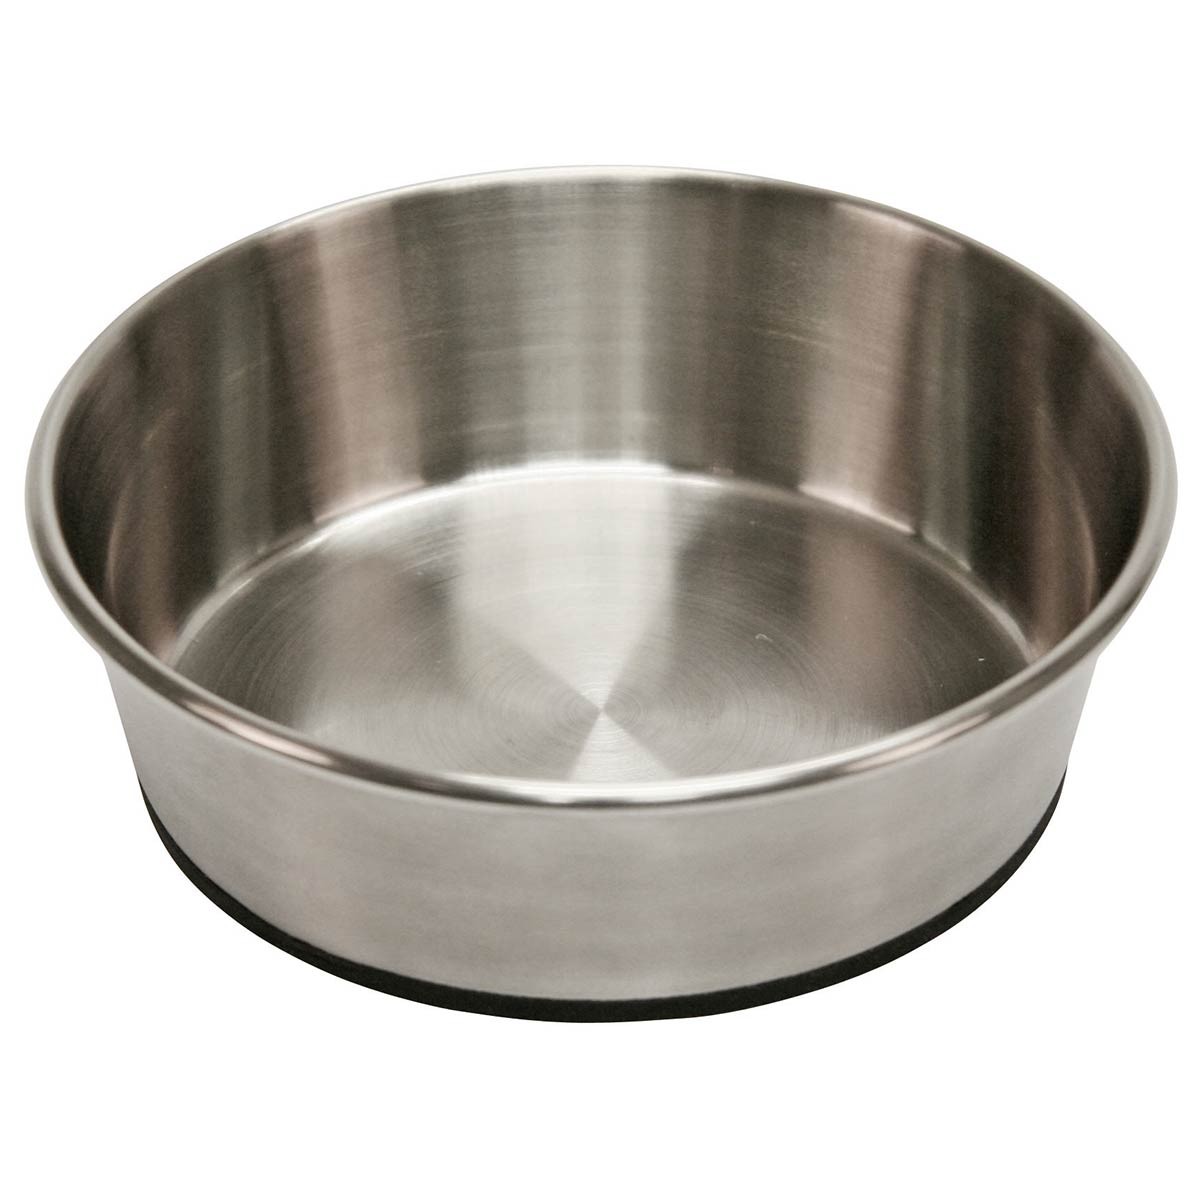 Stainless Steel Bowl 850 ml